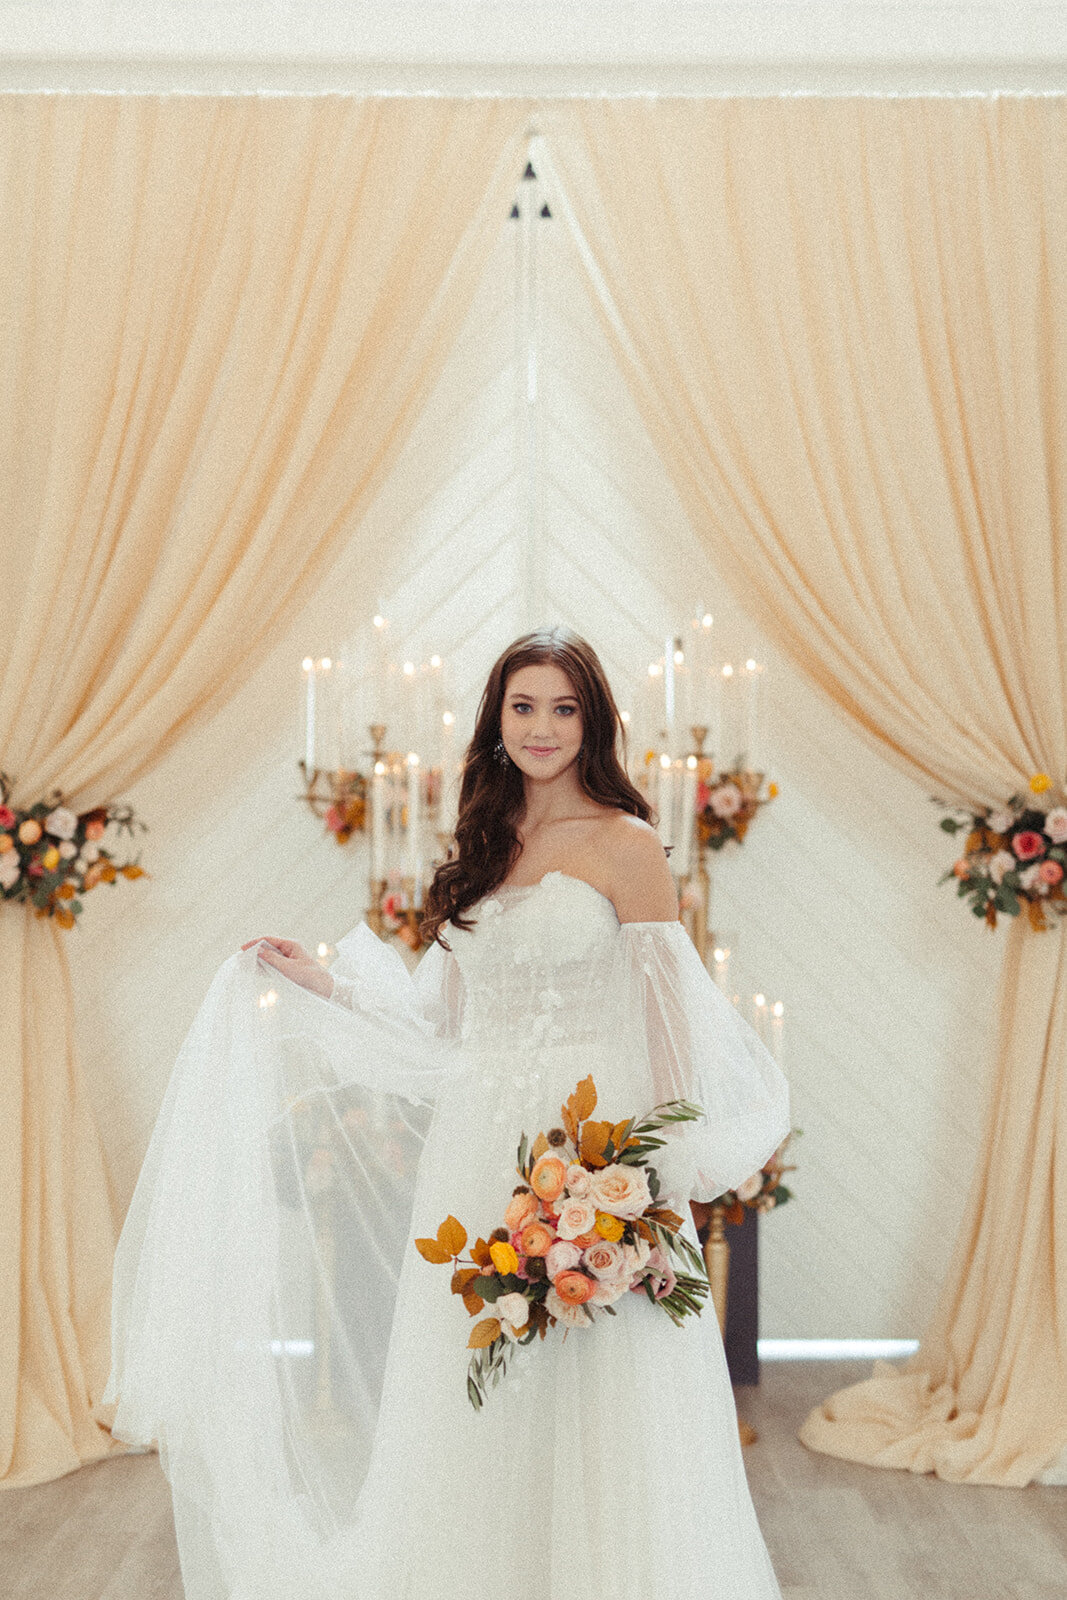 A bride wearing a white wedding gown poses with a bouquet of flowers in a bright and airy room filled with candles.